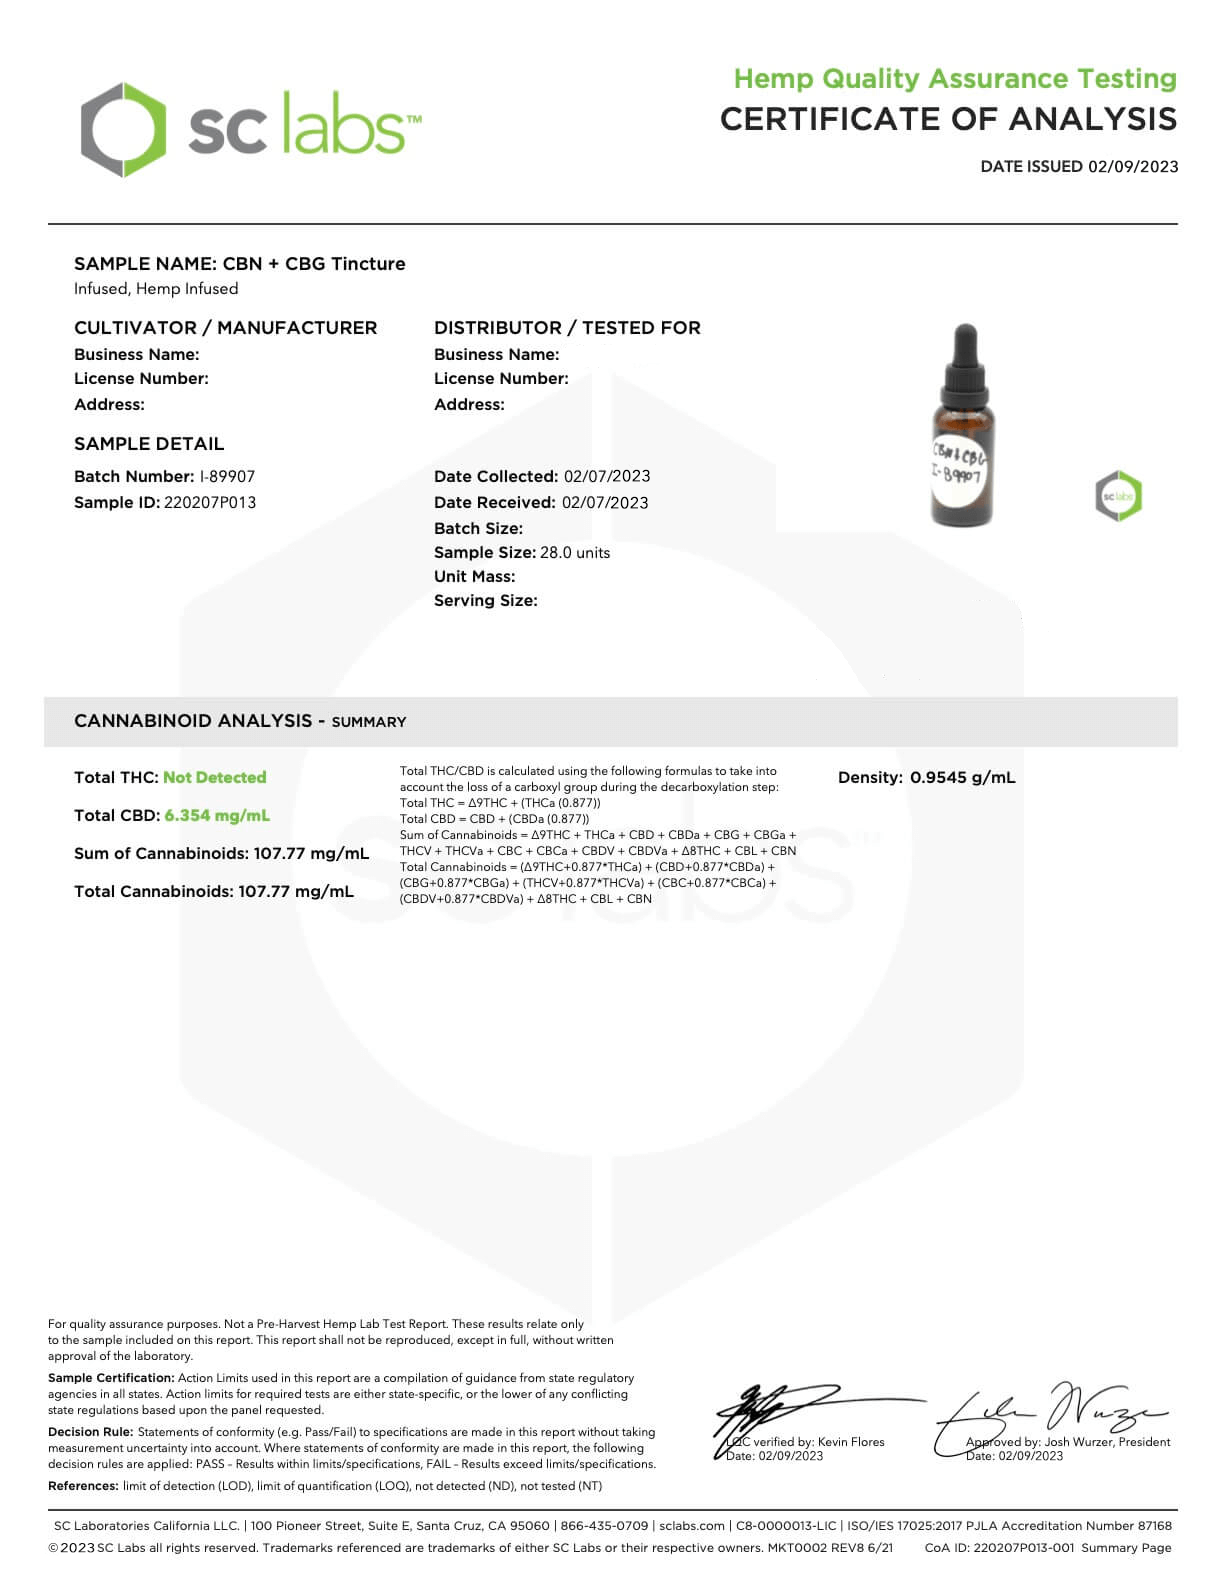 COA for the tincture that contains CBN and CBG